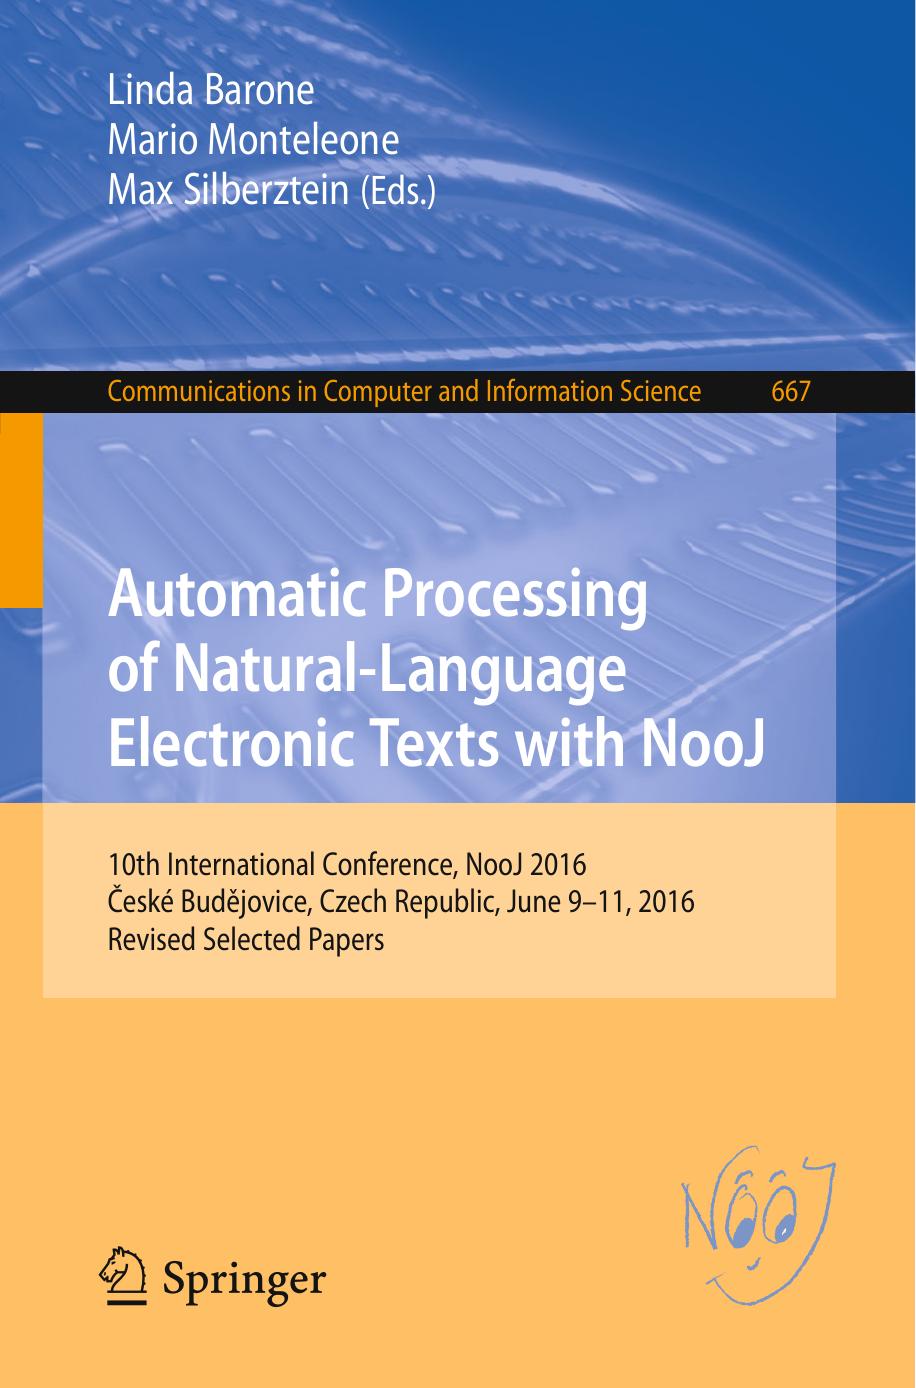 Automatic Processing of Natural-Language Electronic Texts with NooJ: 10th International Conference, NooJ 2016, České Budějovice, Czech Republic, June 9-11, 2016, Revised Selected Papers